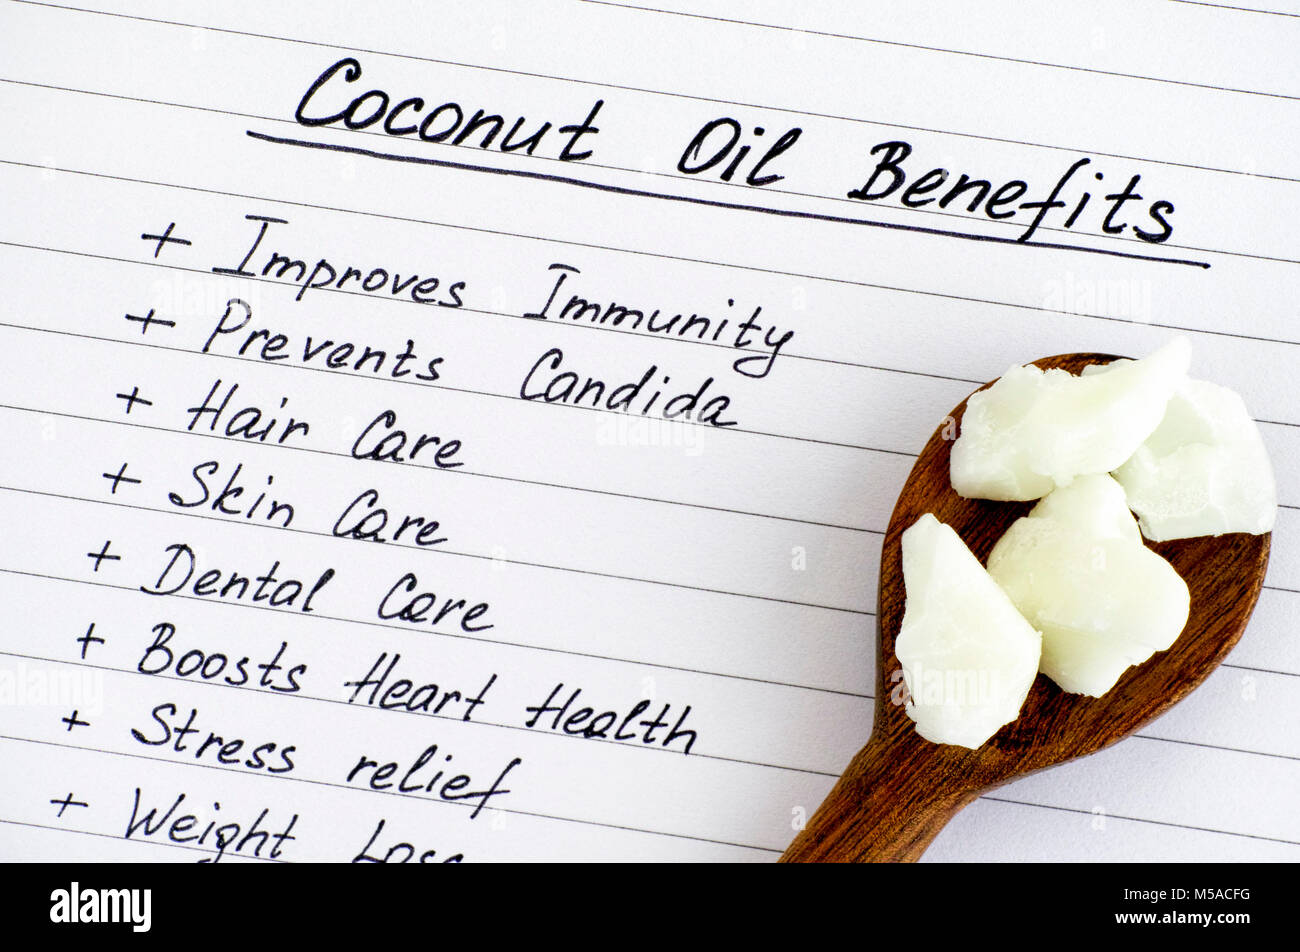 List of Coconut Oil Benefits with wooden spoon with coconut oil. Close-up. Stock Photo